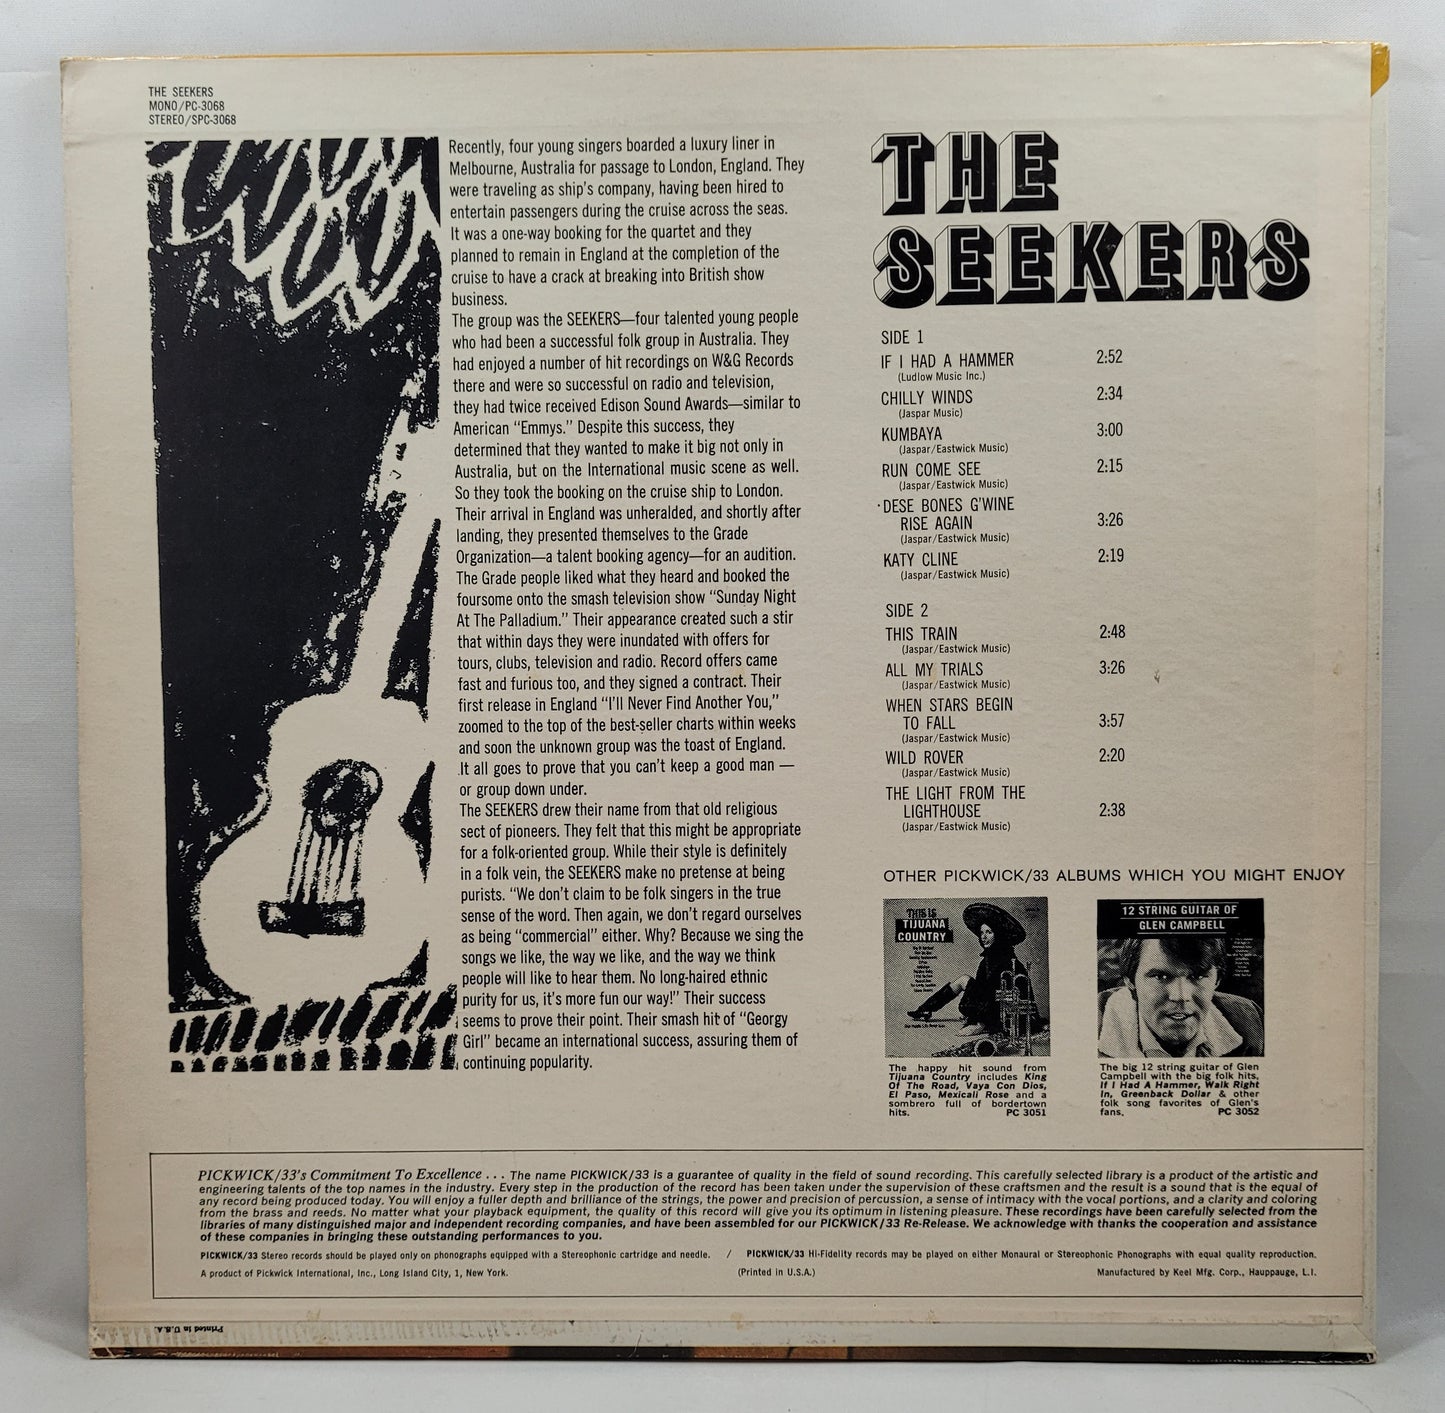 The Seekers - The Seekers [1967 Reissue Mono] [Used Vinyl Record LP]